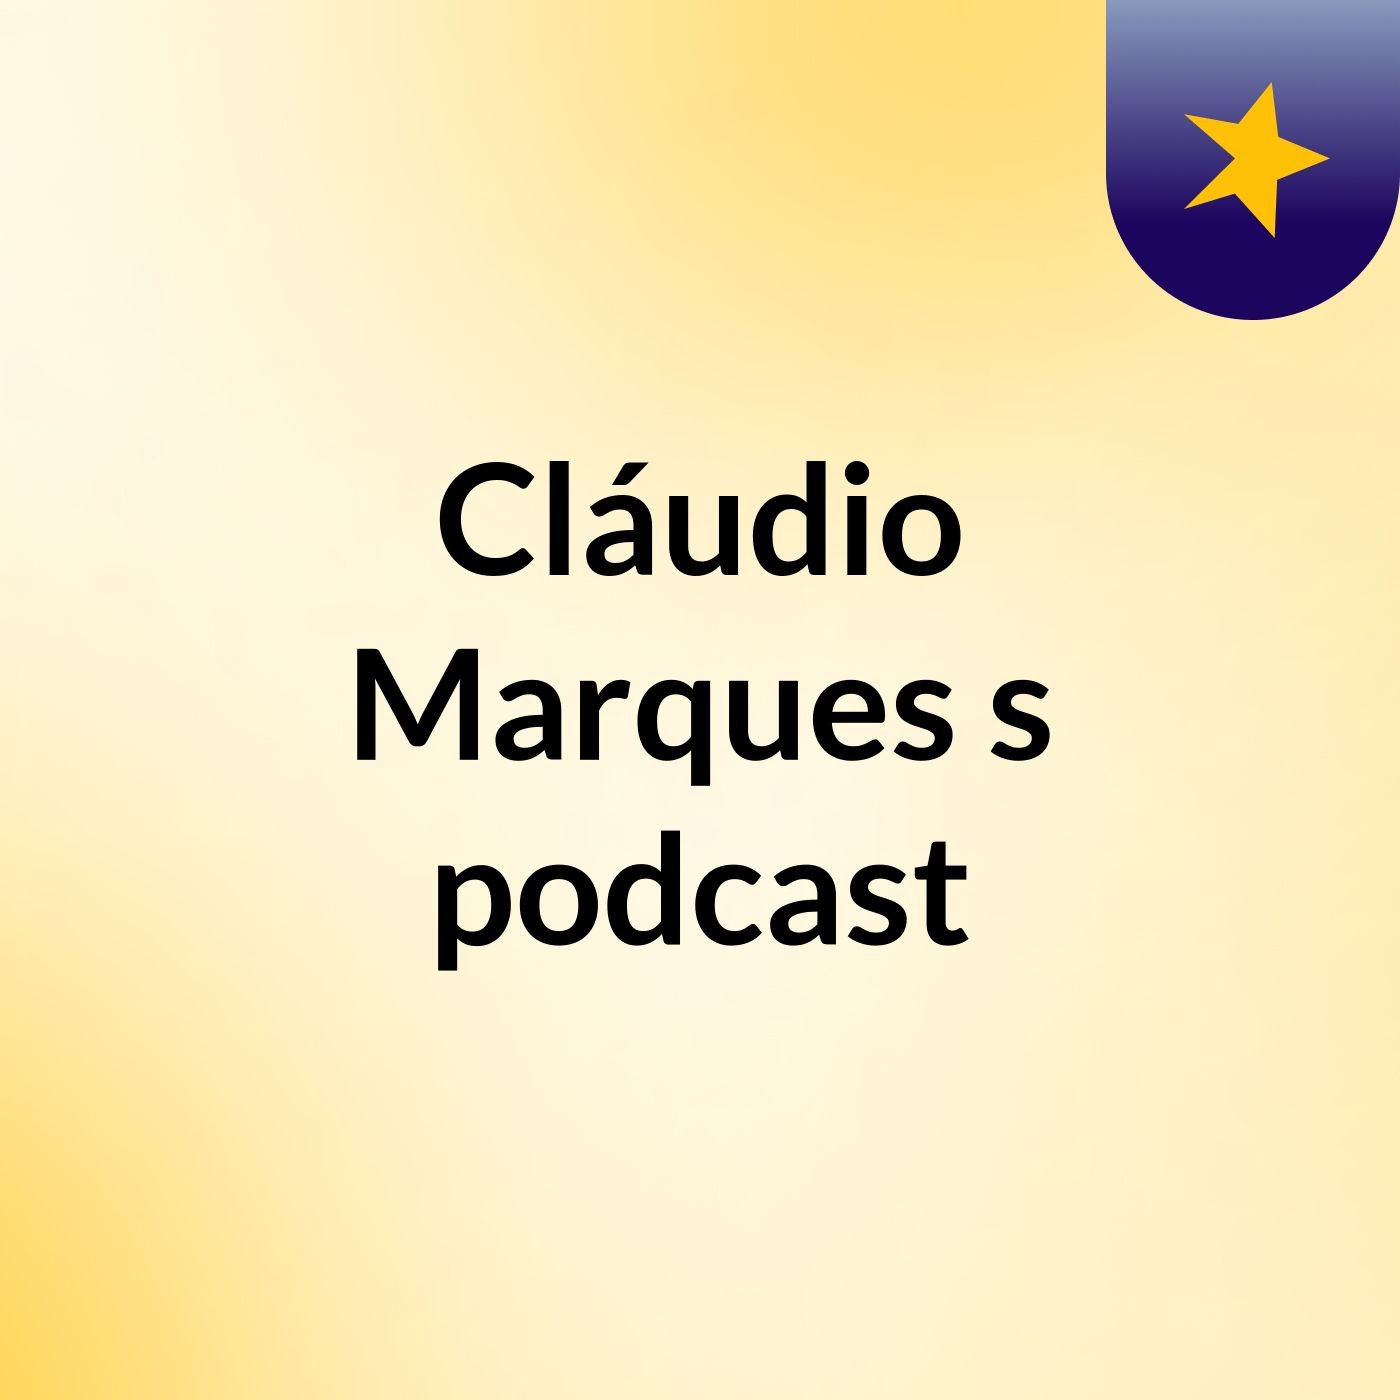 Cláudio Marques's podcast